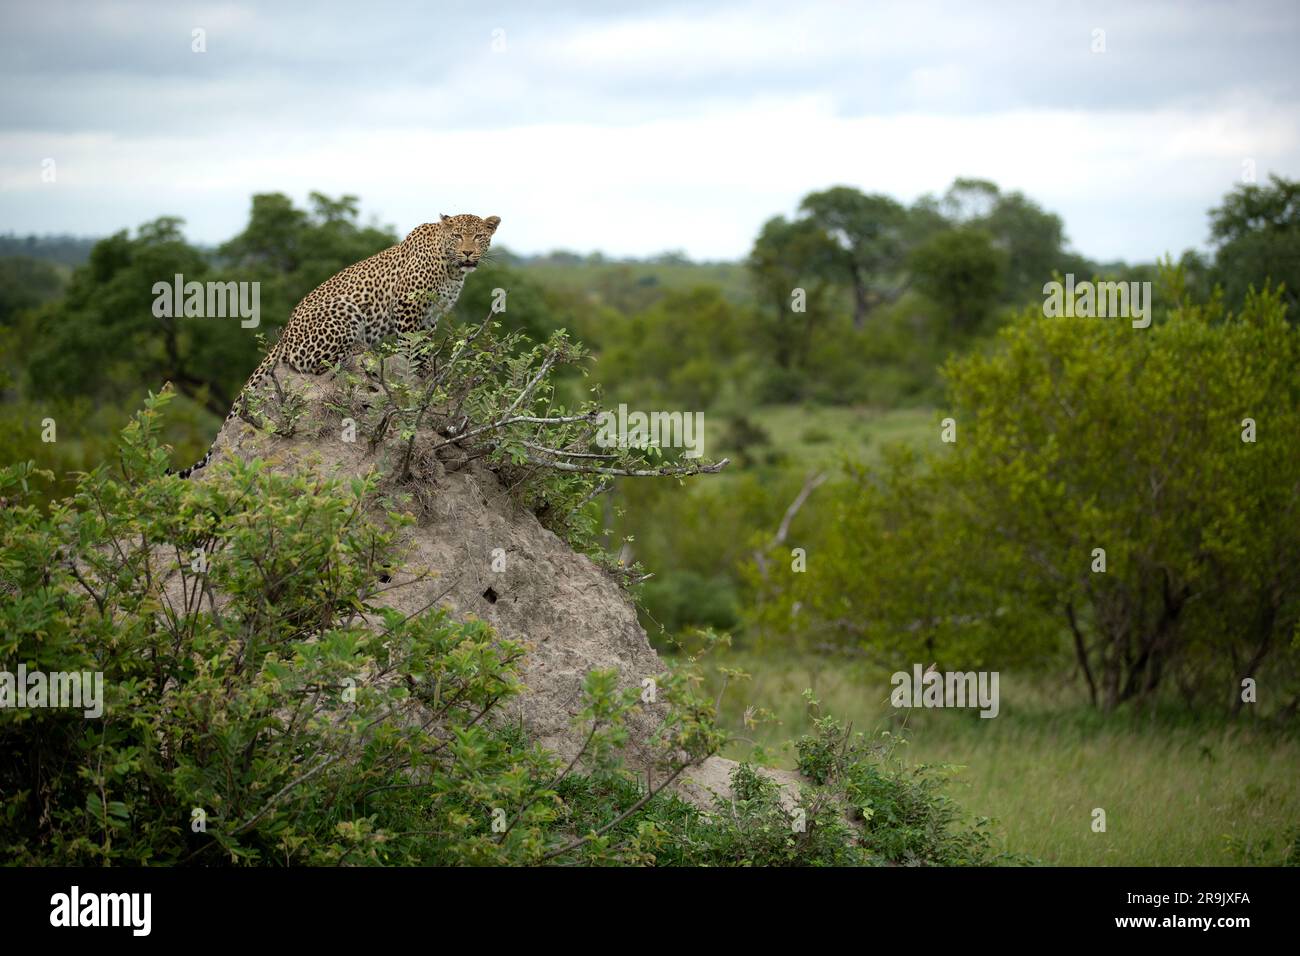 A female leopard, Panthera pardus, sits on top of a mound, looking around. Stock Photo